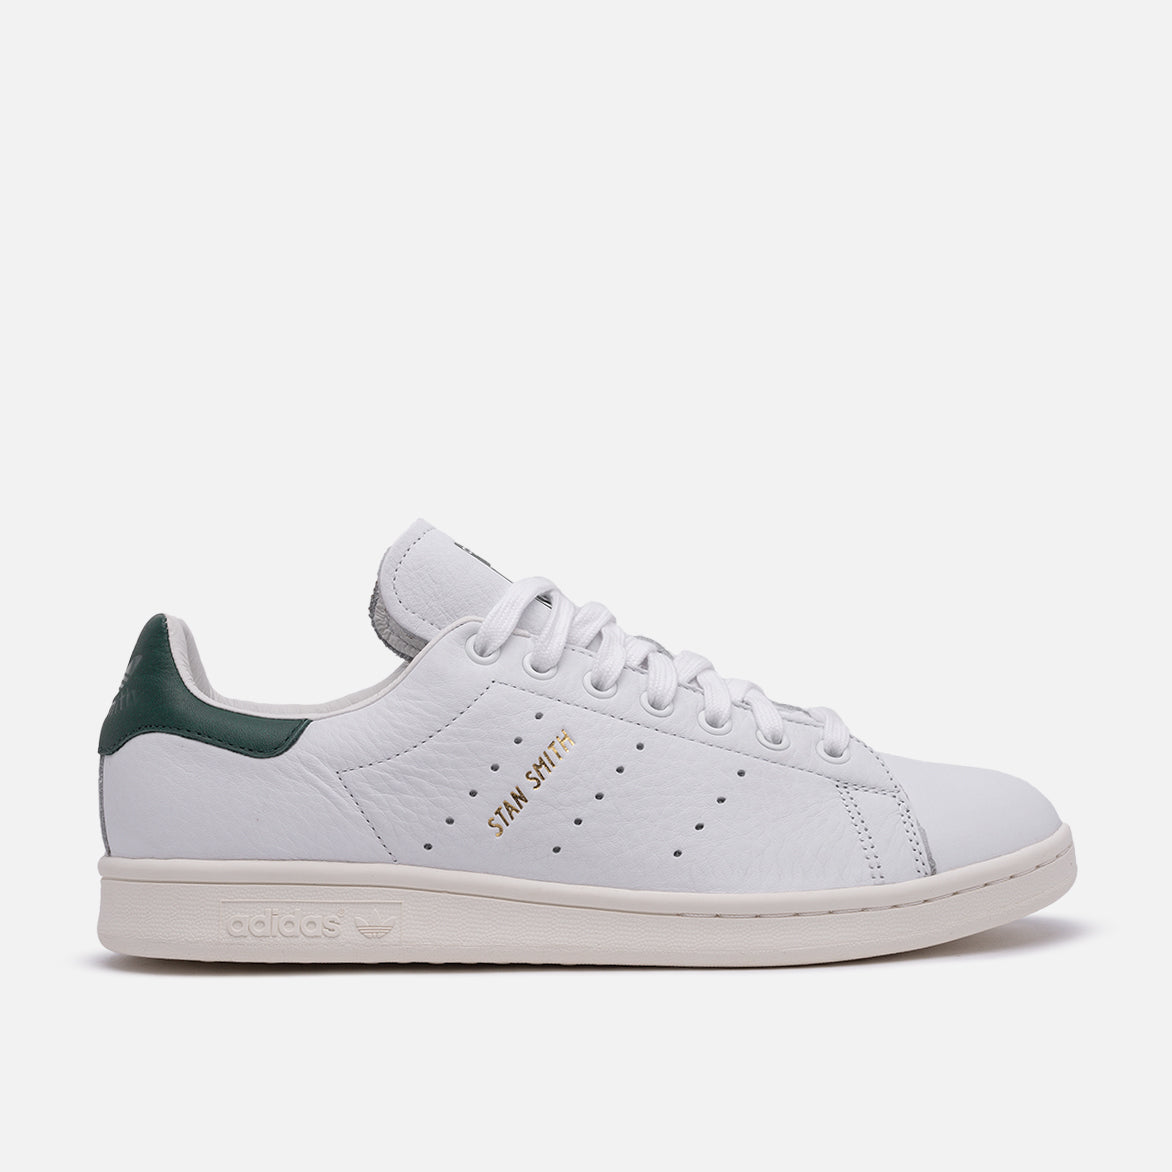 A White Upper Lands On The adidas Originals Stan Smith Leather